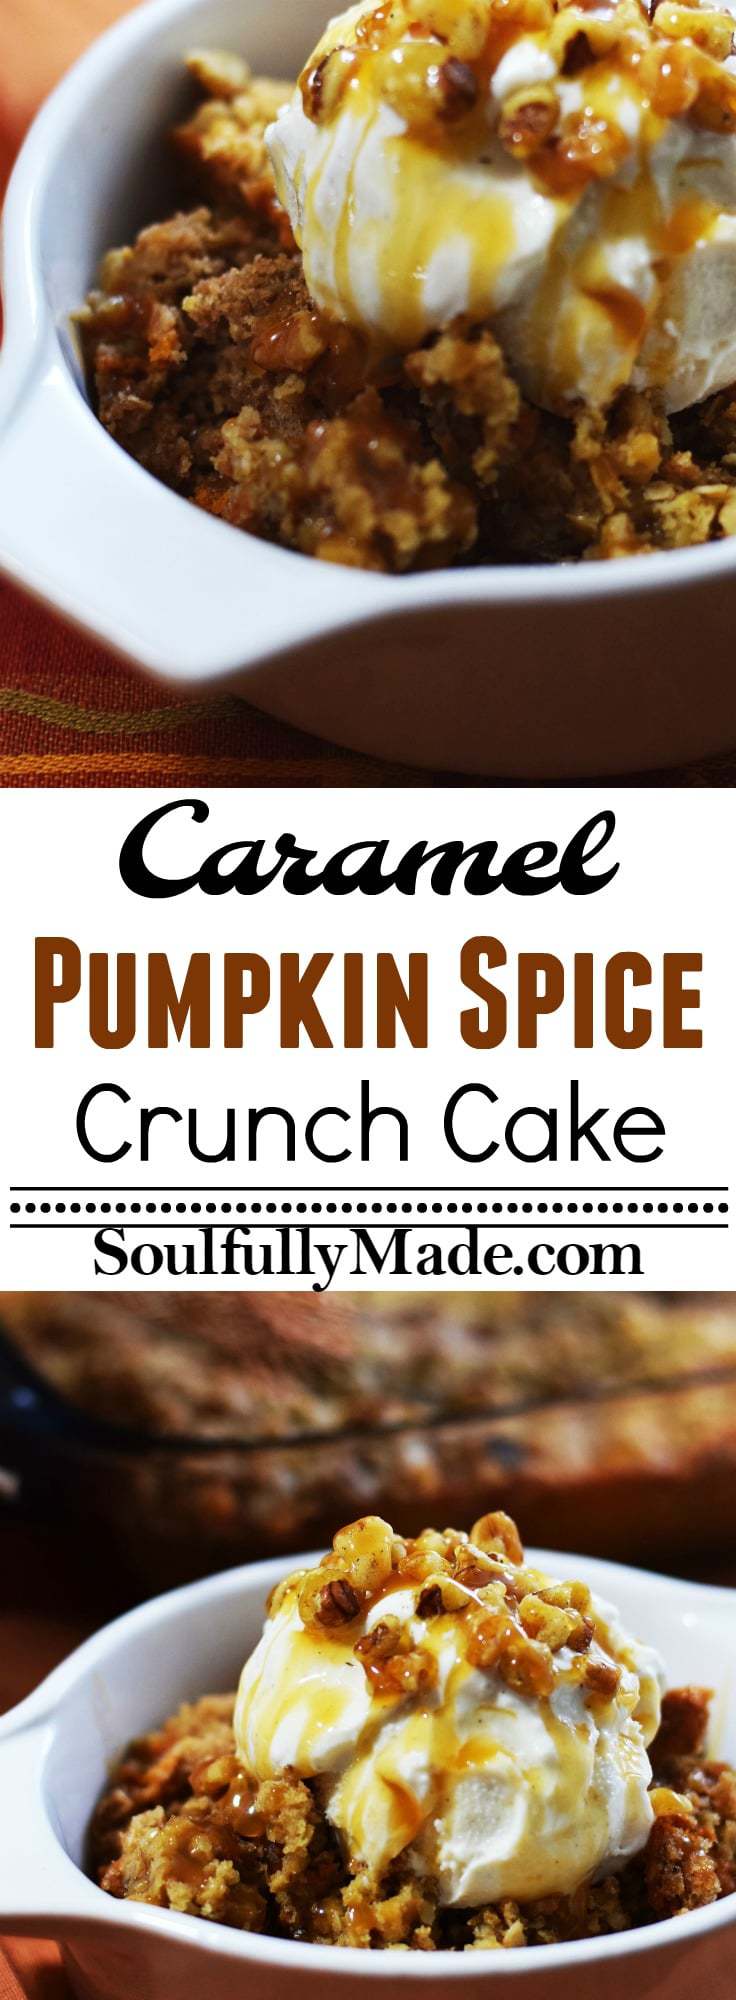 the pinterest image for this caramel pumpkin spice crunch cake